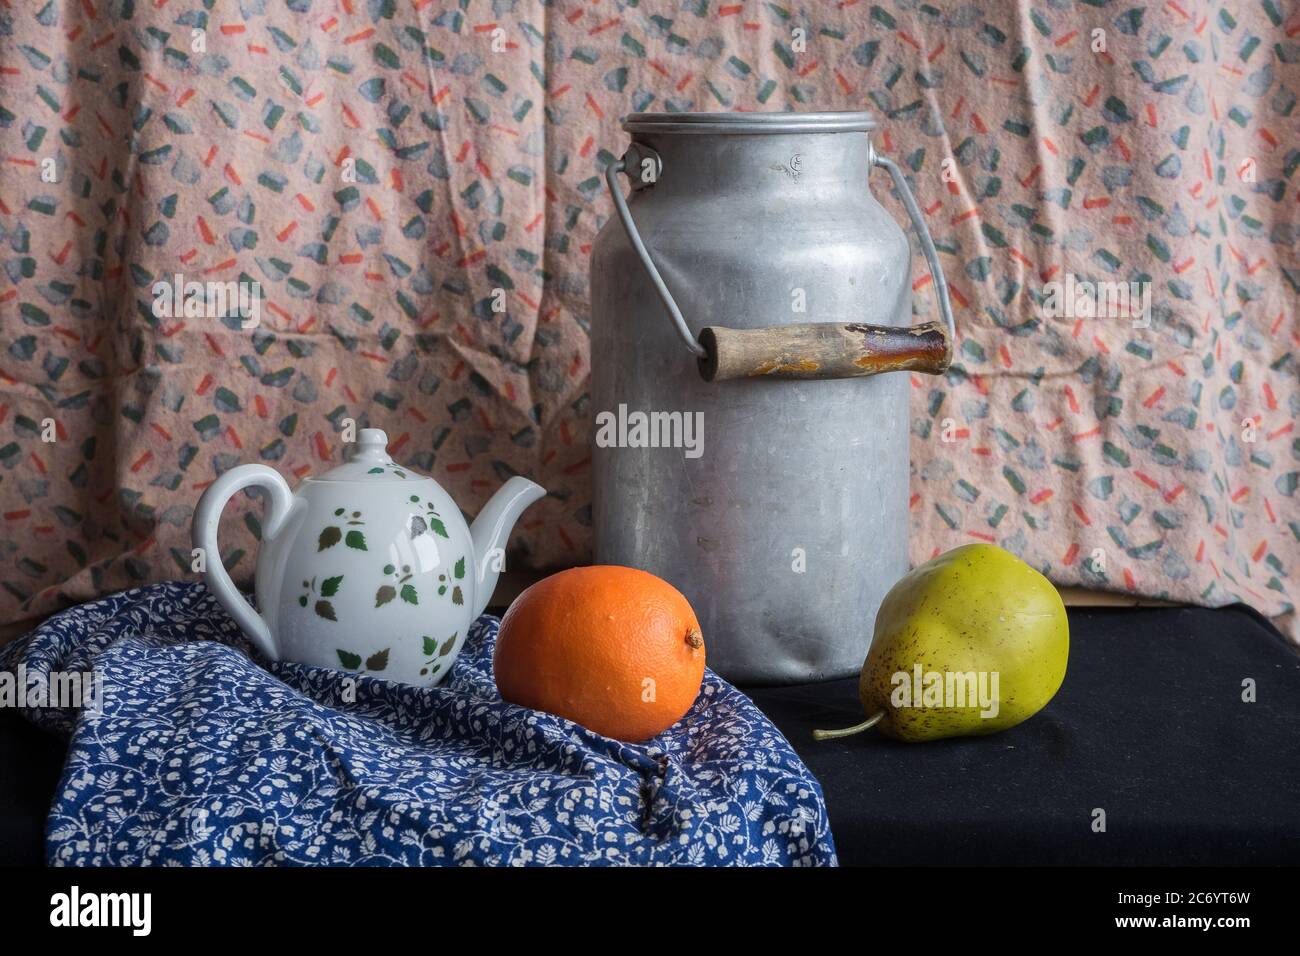 Still life with a milk can, teapot, pear and orange. russian painting style Stock Photo